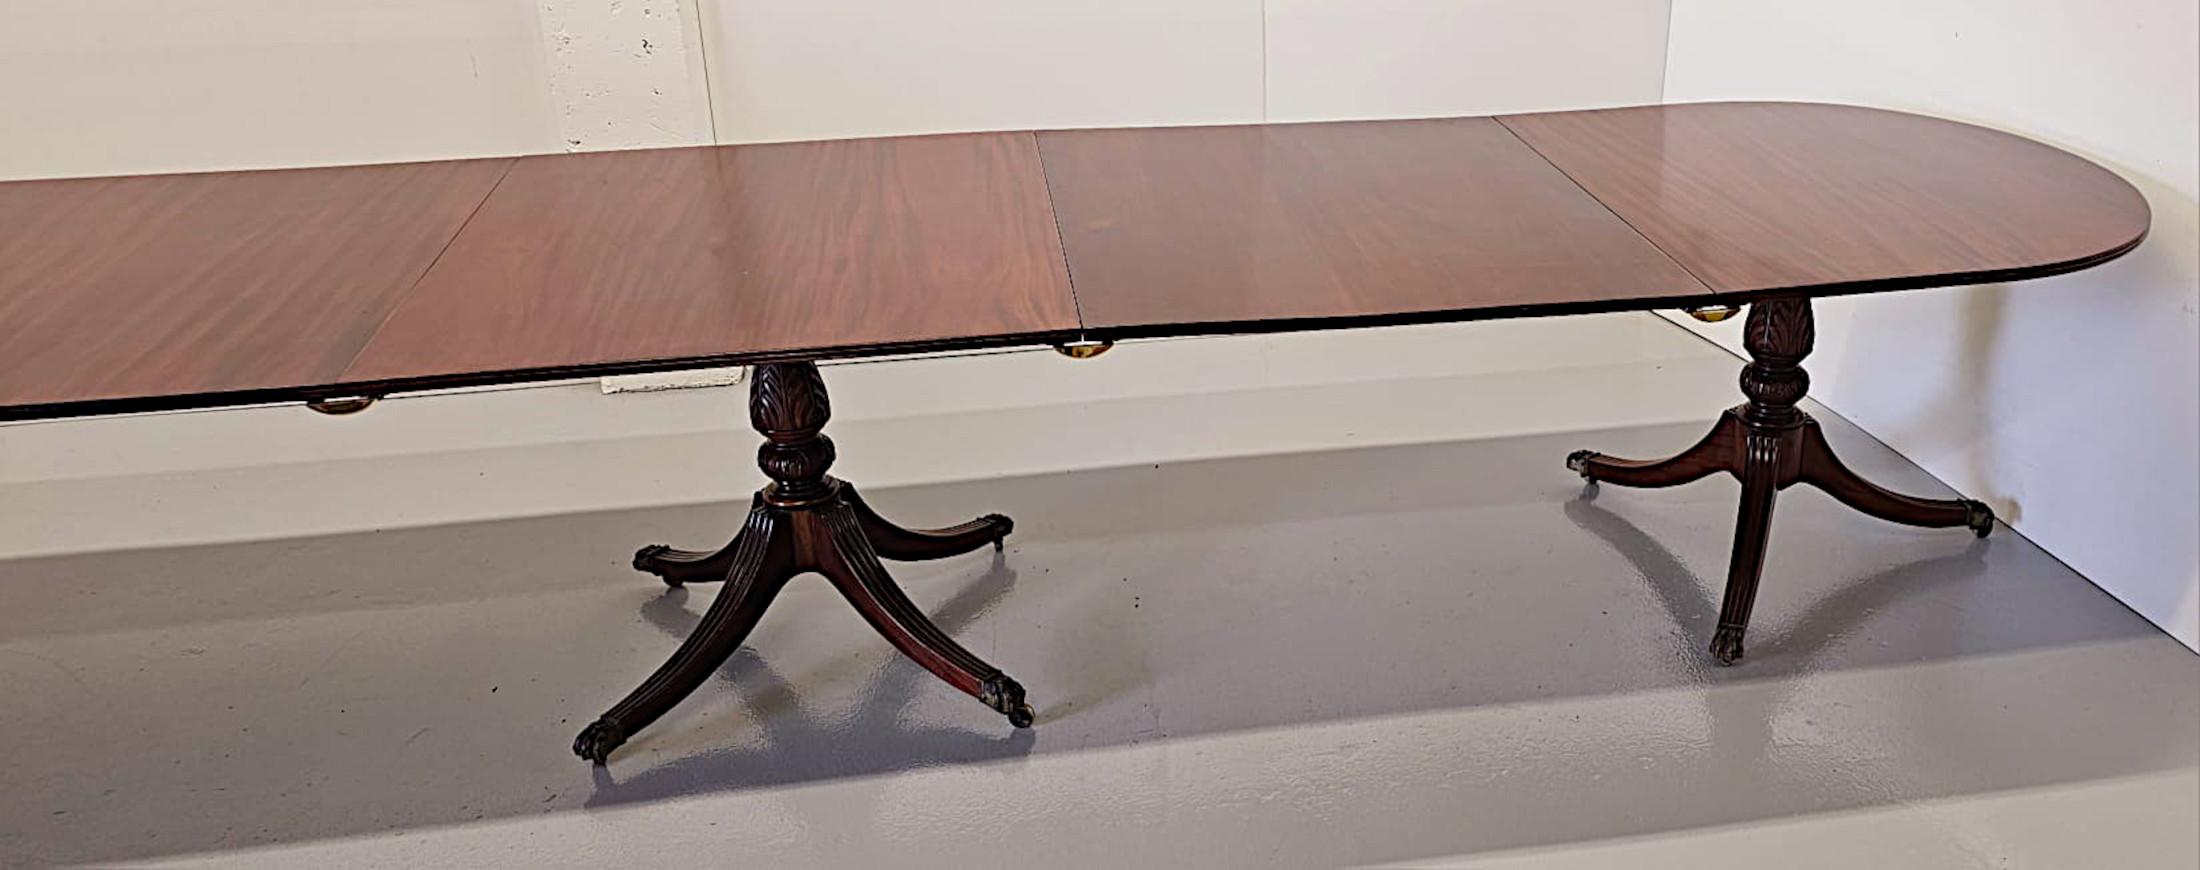 Mahogany A Very Fine Early 20th Century Regency Style D-End Dining Room Table For Sale